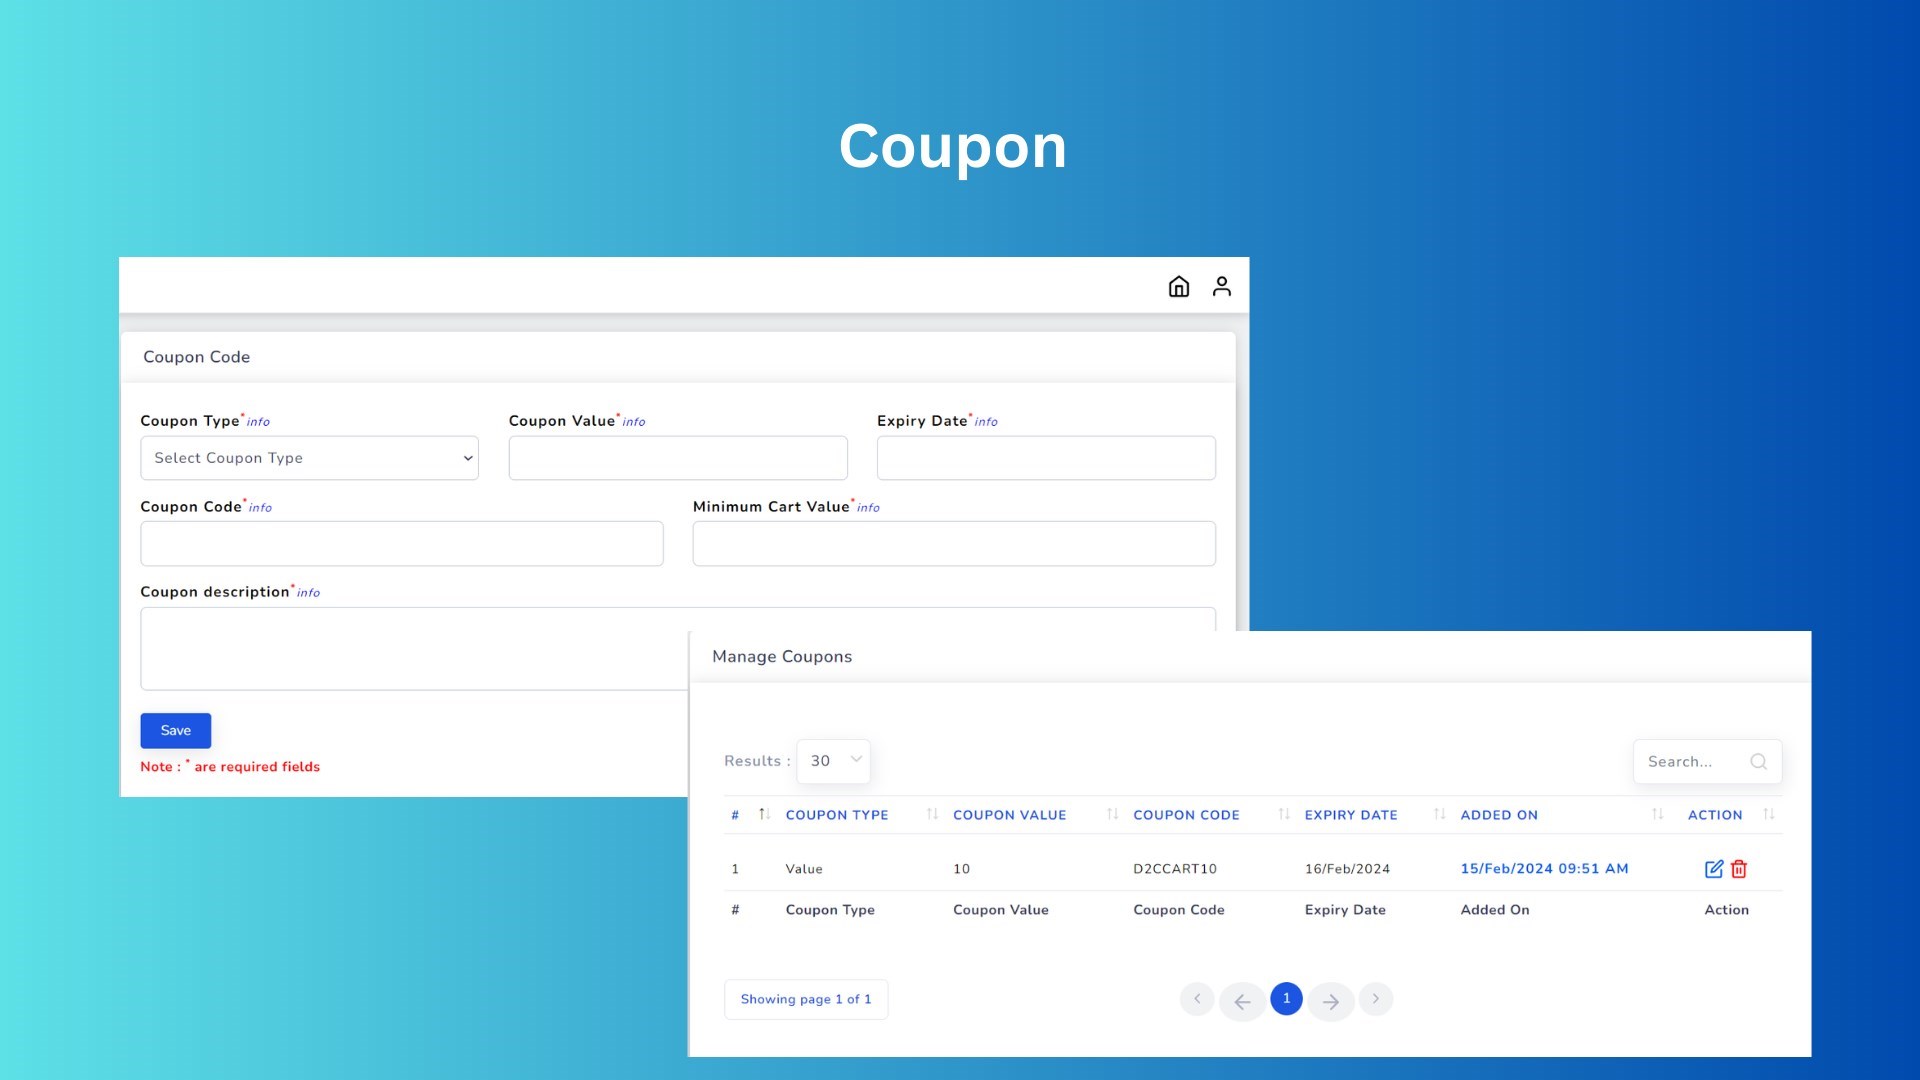 Incorporated a feature for managing coupons based on the overall cart value, allowing users to create, edit, delete, and apply discounts to their purchases according to predefined thresholds.